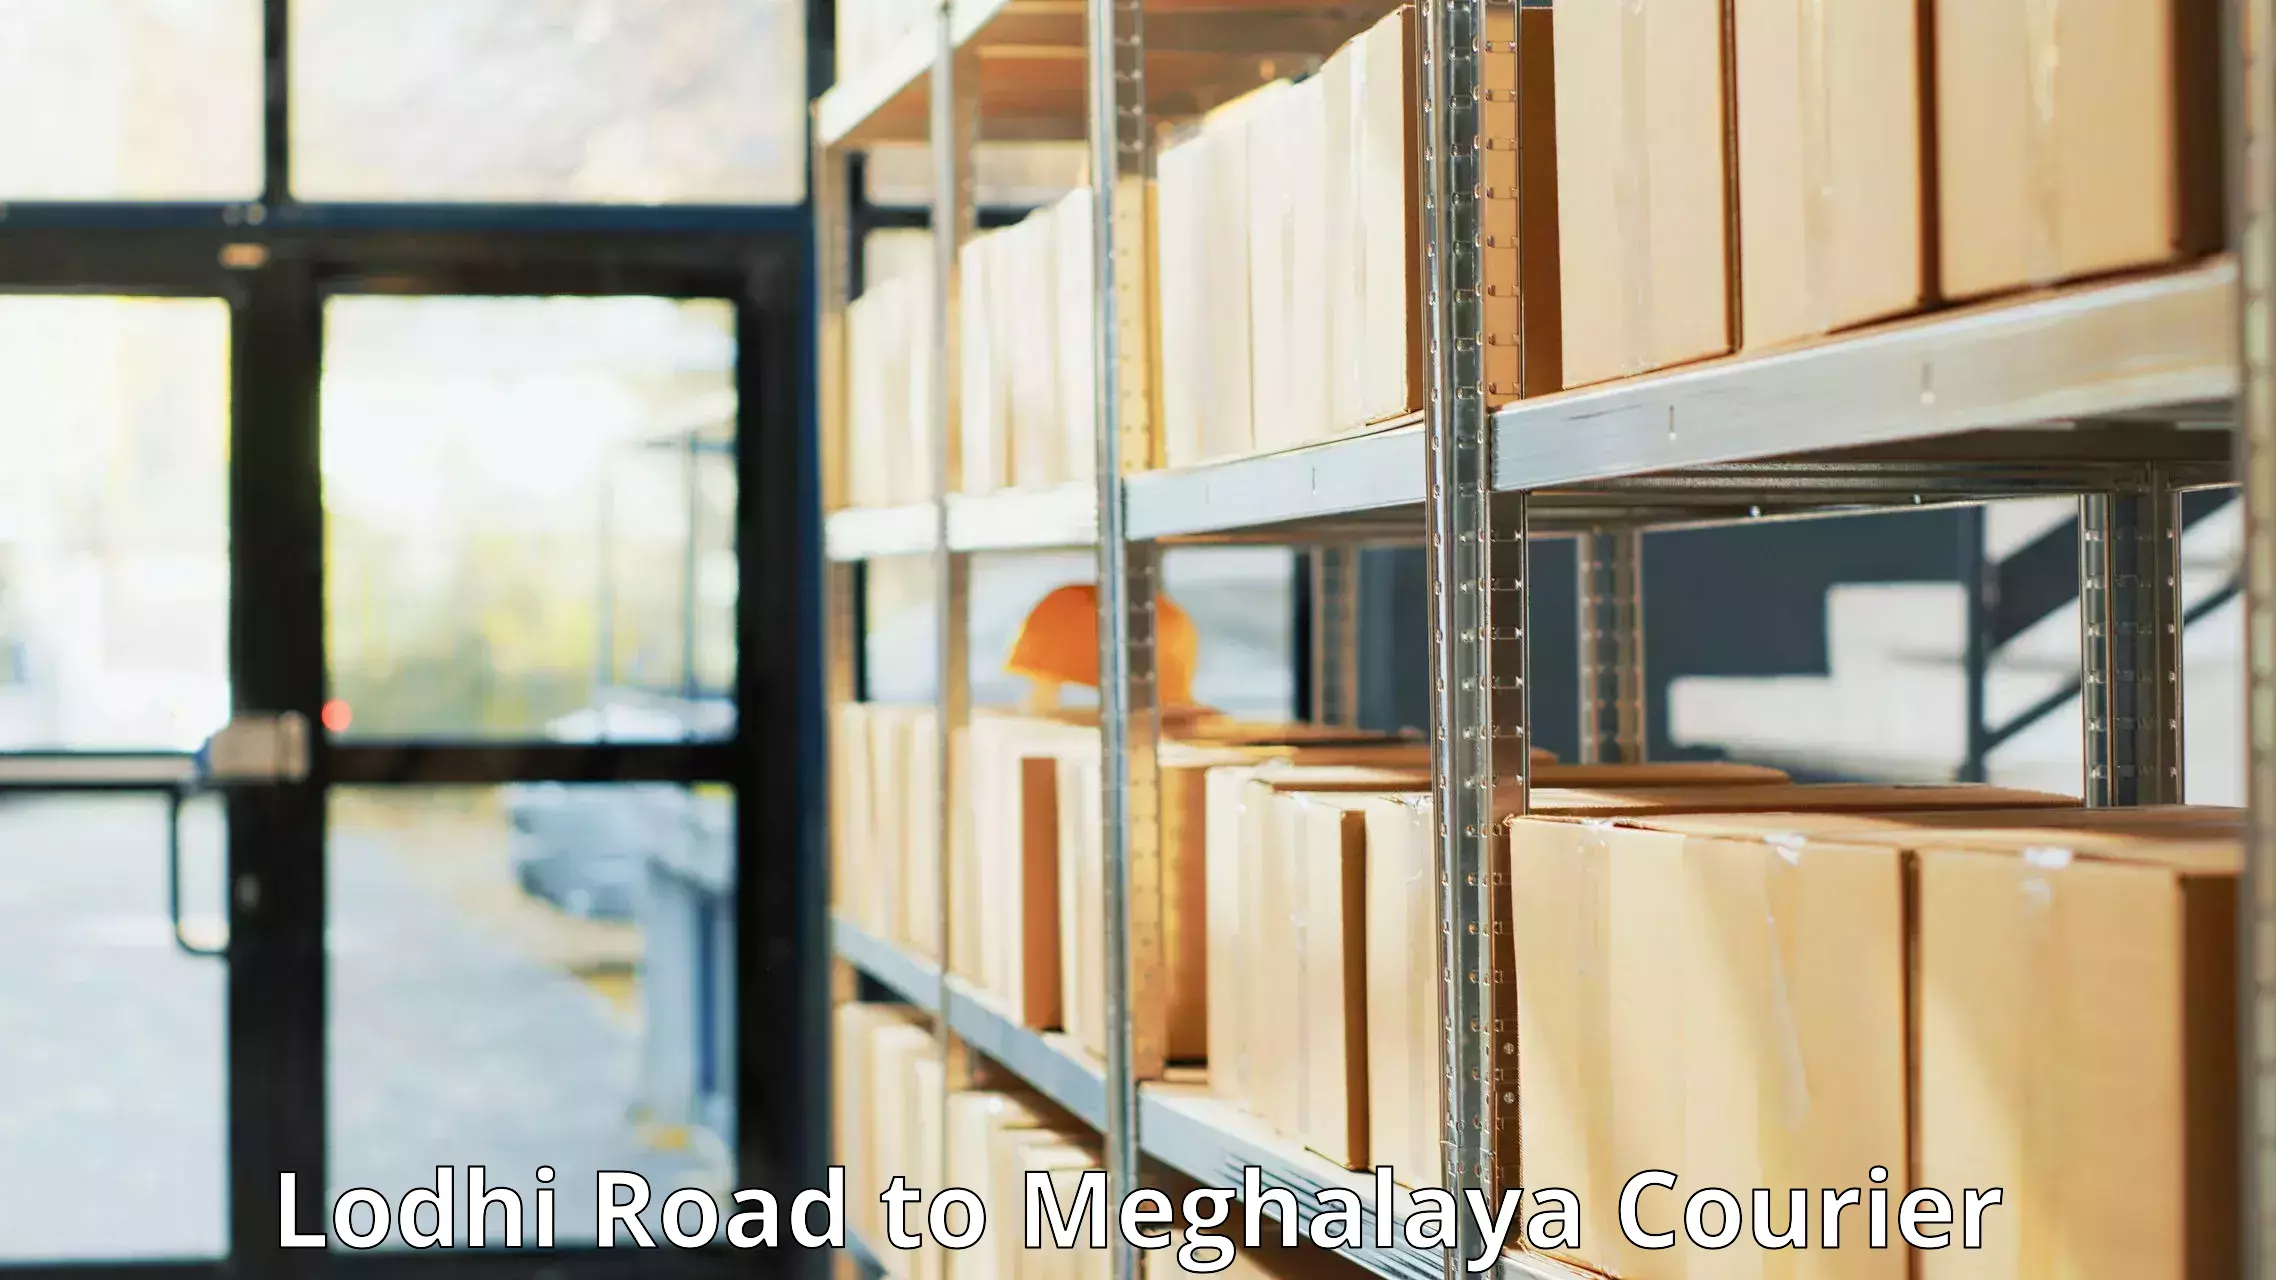 Efficient parcel delivery in Lodhi Road to Meghalaya